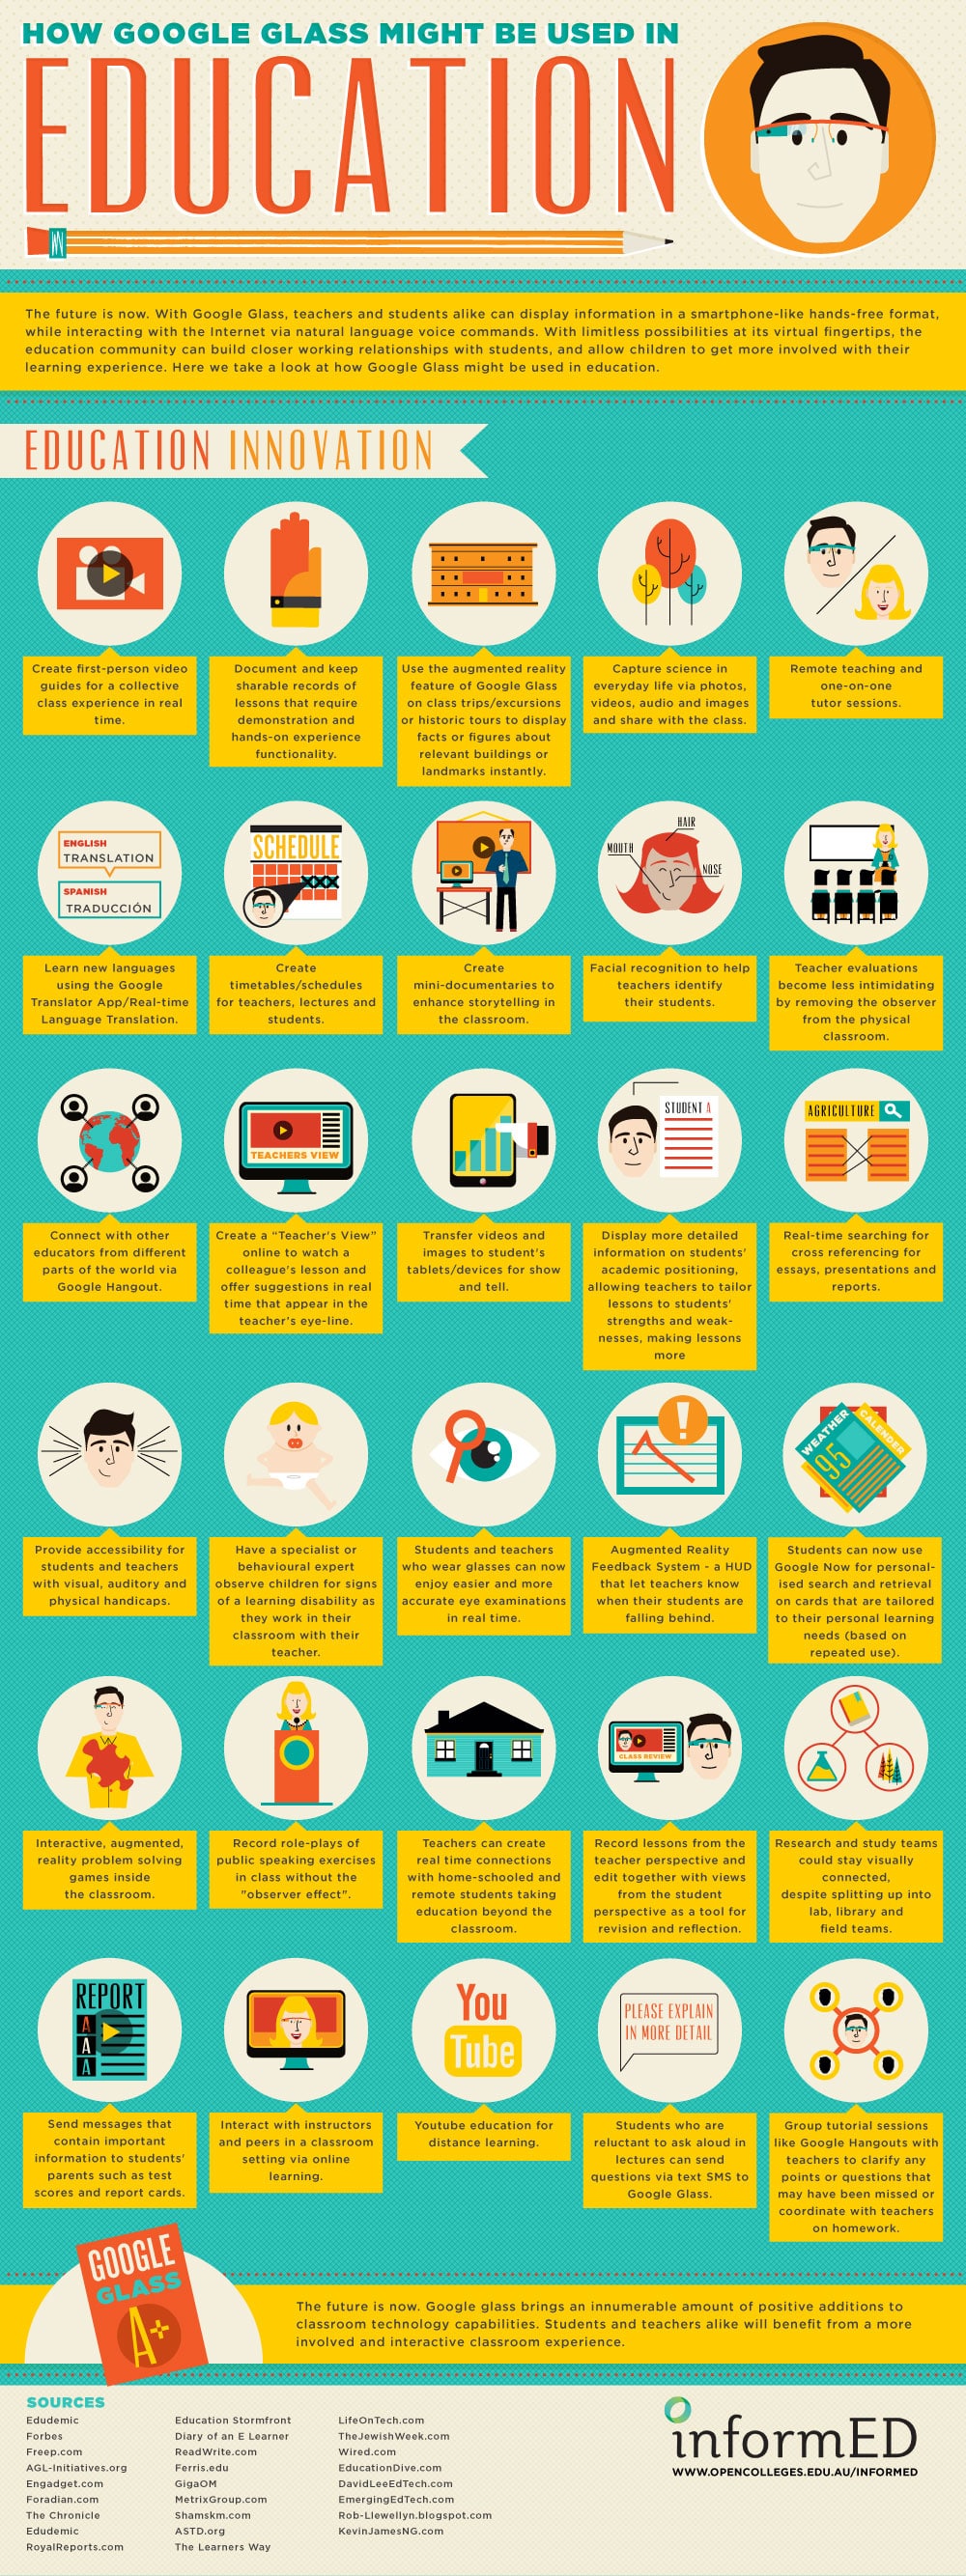 30 Reasons Why Google Glass Should Be Allowed In Schools [Infographic]